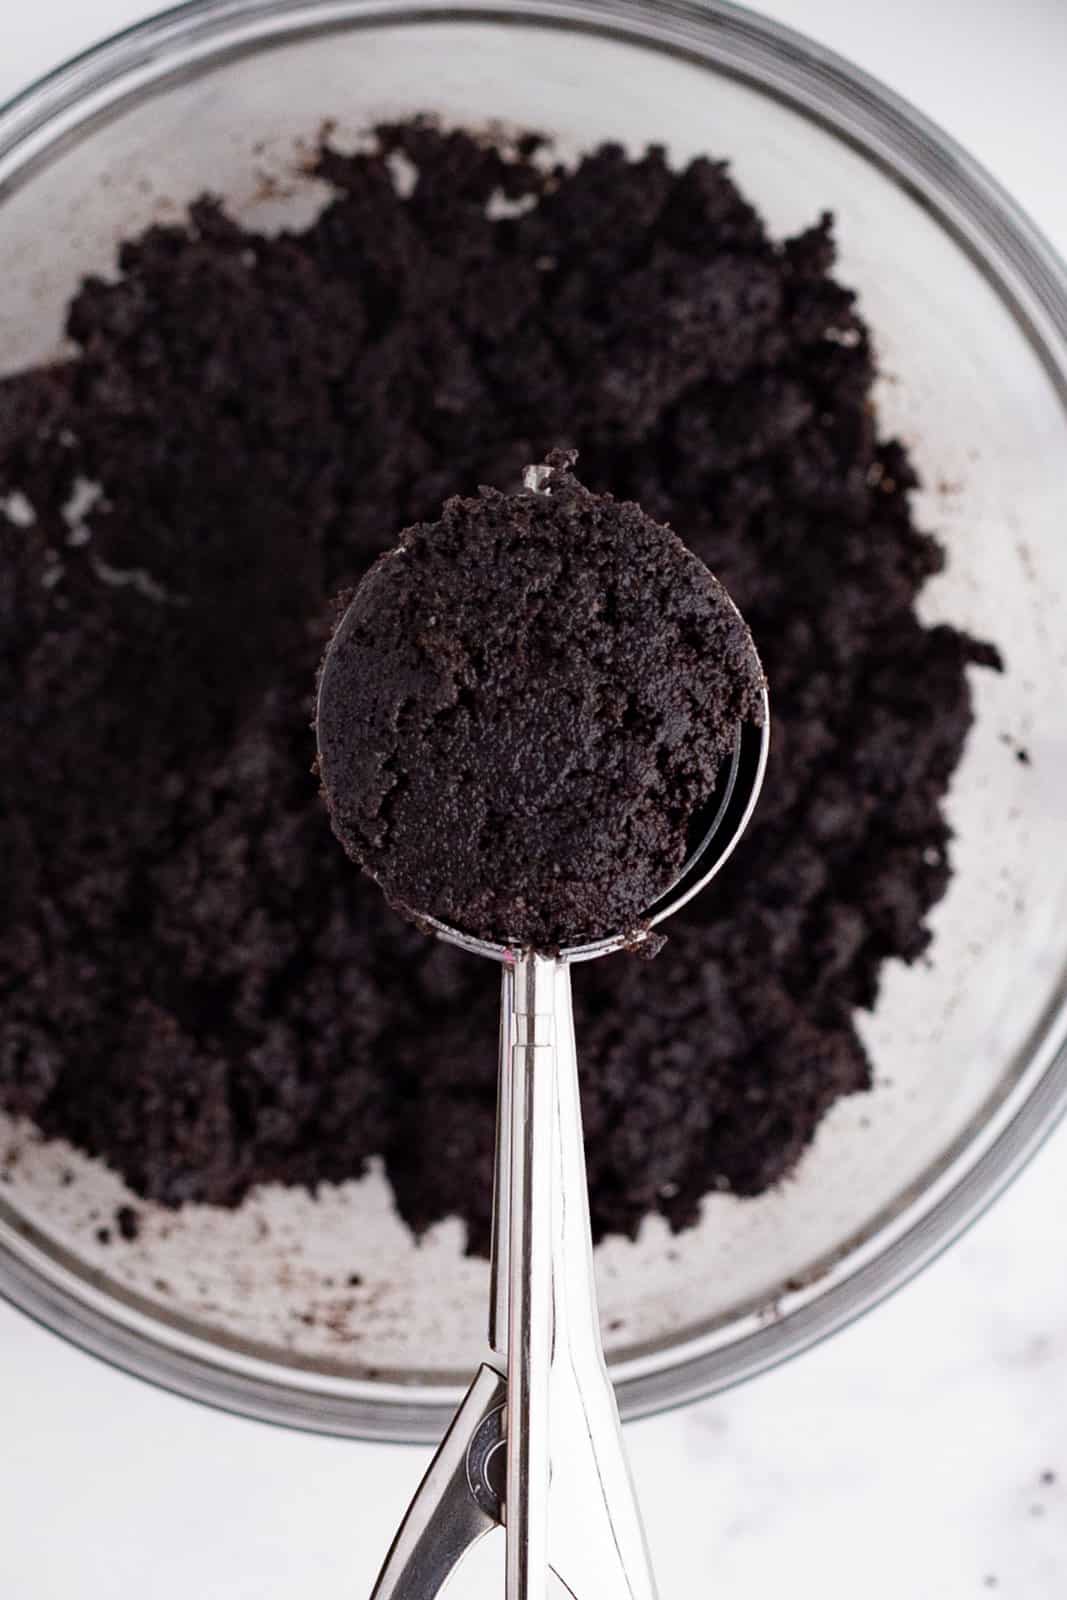 a cookie scoop scooping up some Oreo cookie crumb crust mixture out of a bowl.